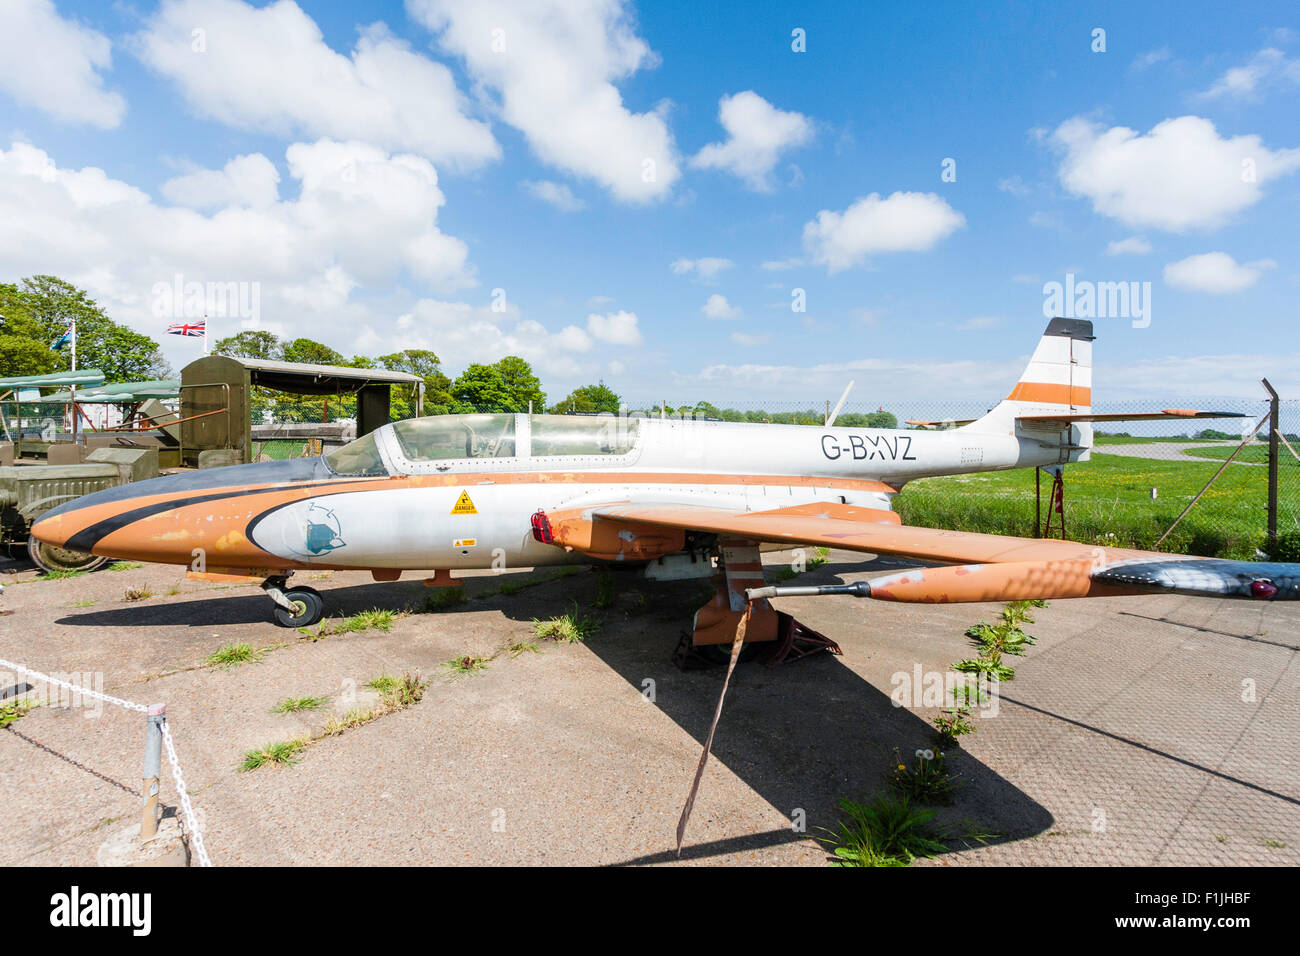 Manston airport museum. PZL Mielec TS-11 Iskra, a Polish jet trainer, on concrete airport apron in bright sunshine. Stock Photo